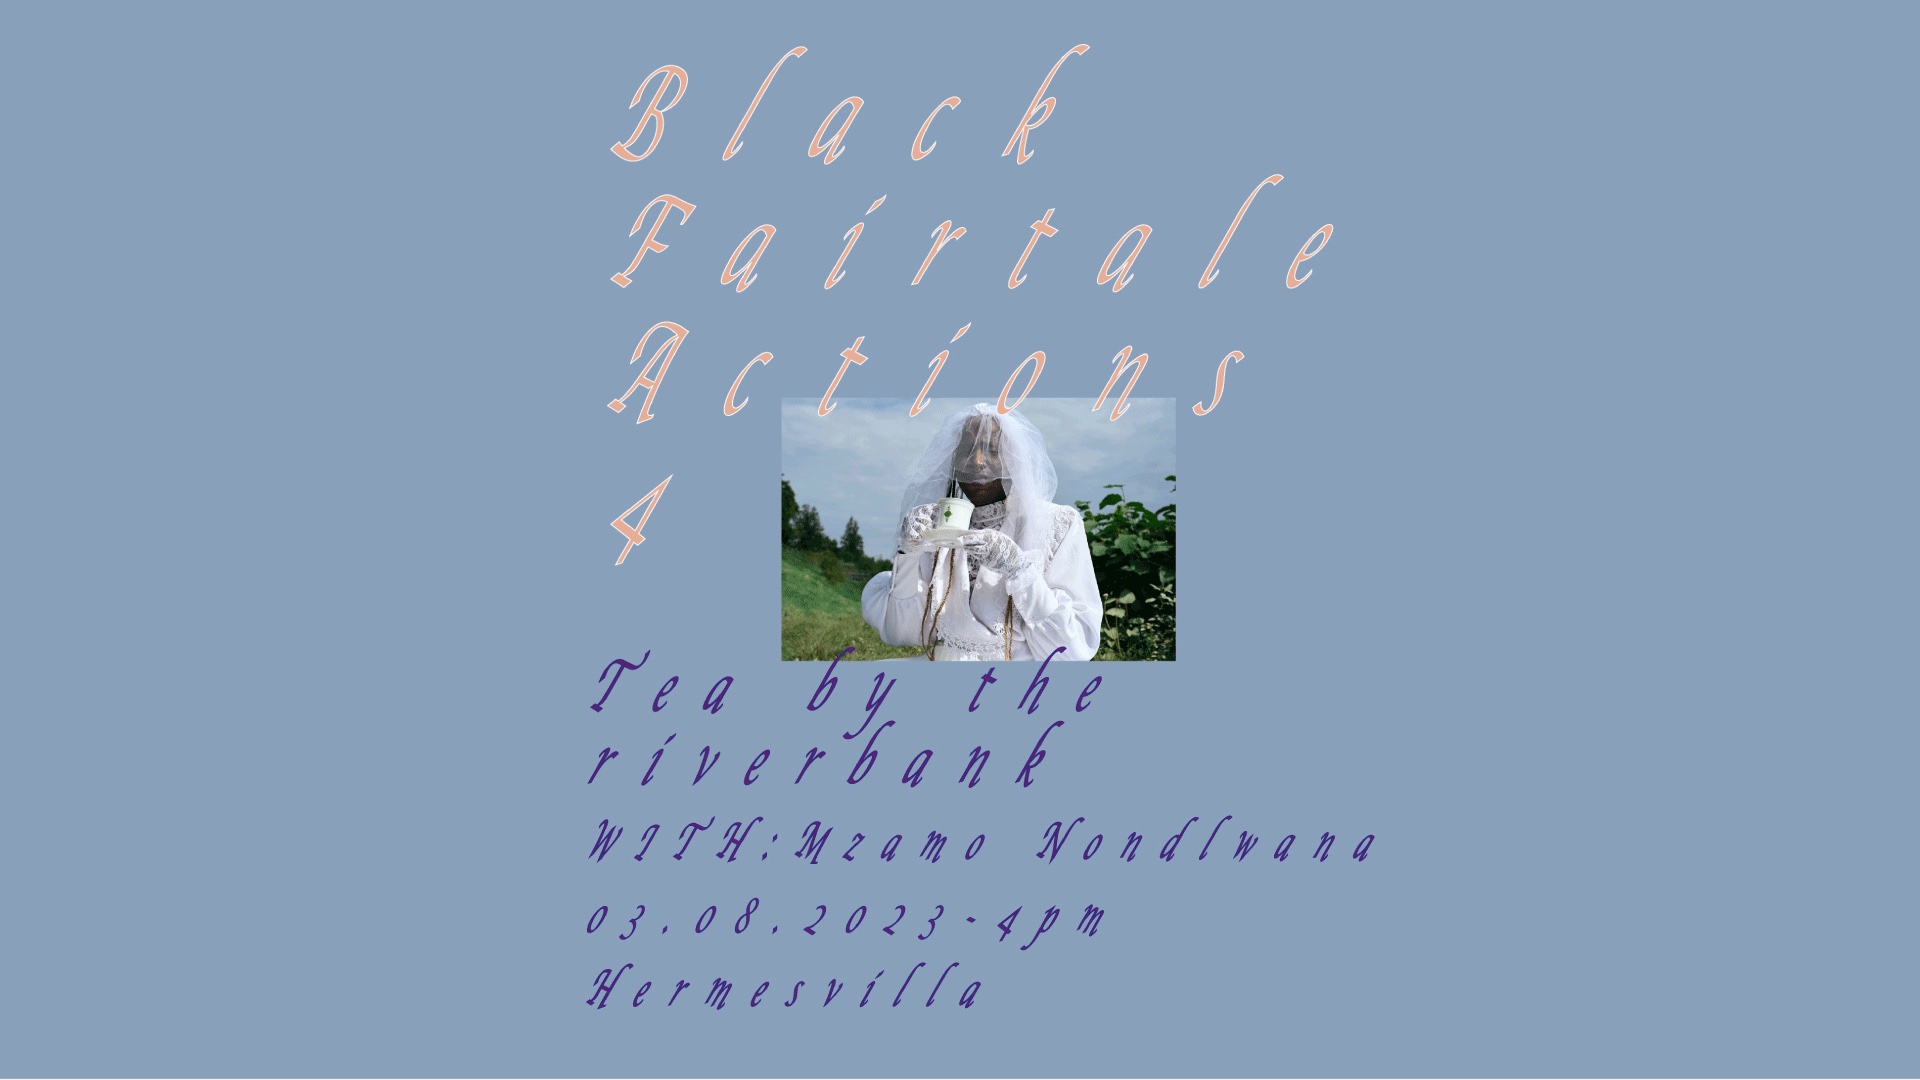 Black Fairytale Actions 4: Tea by the river bank